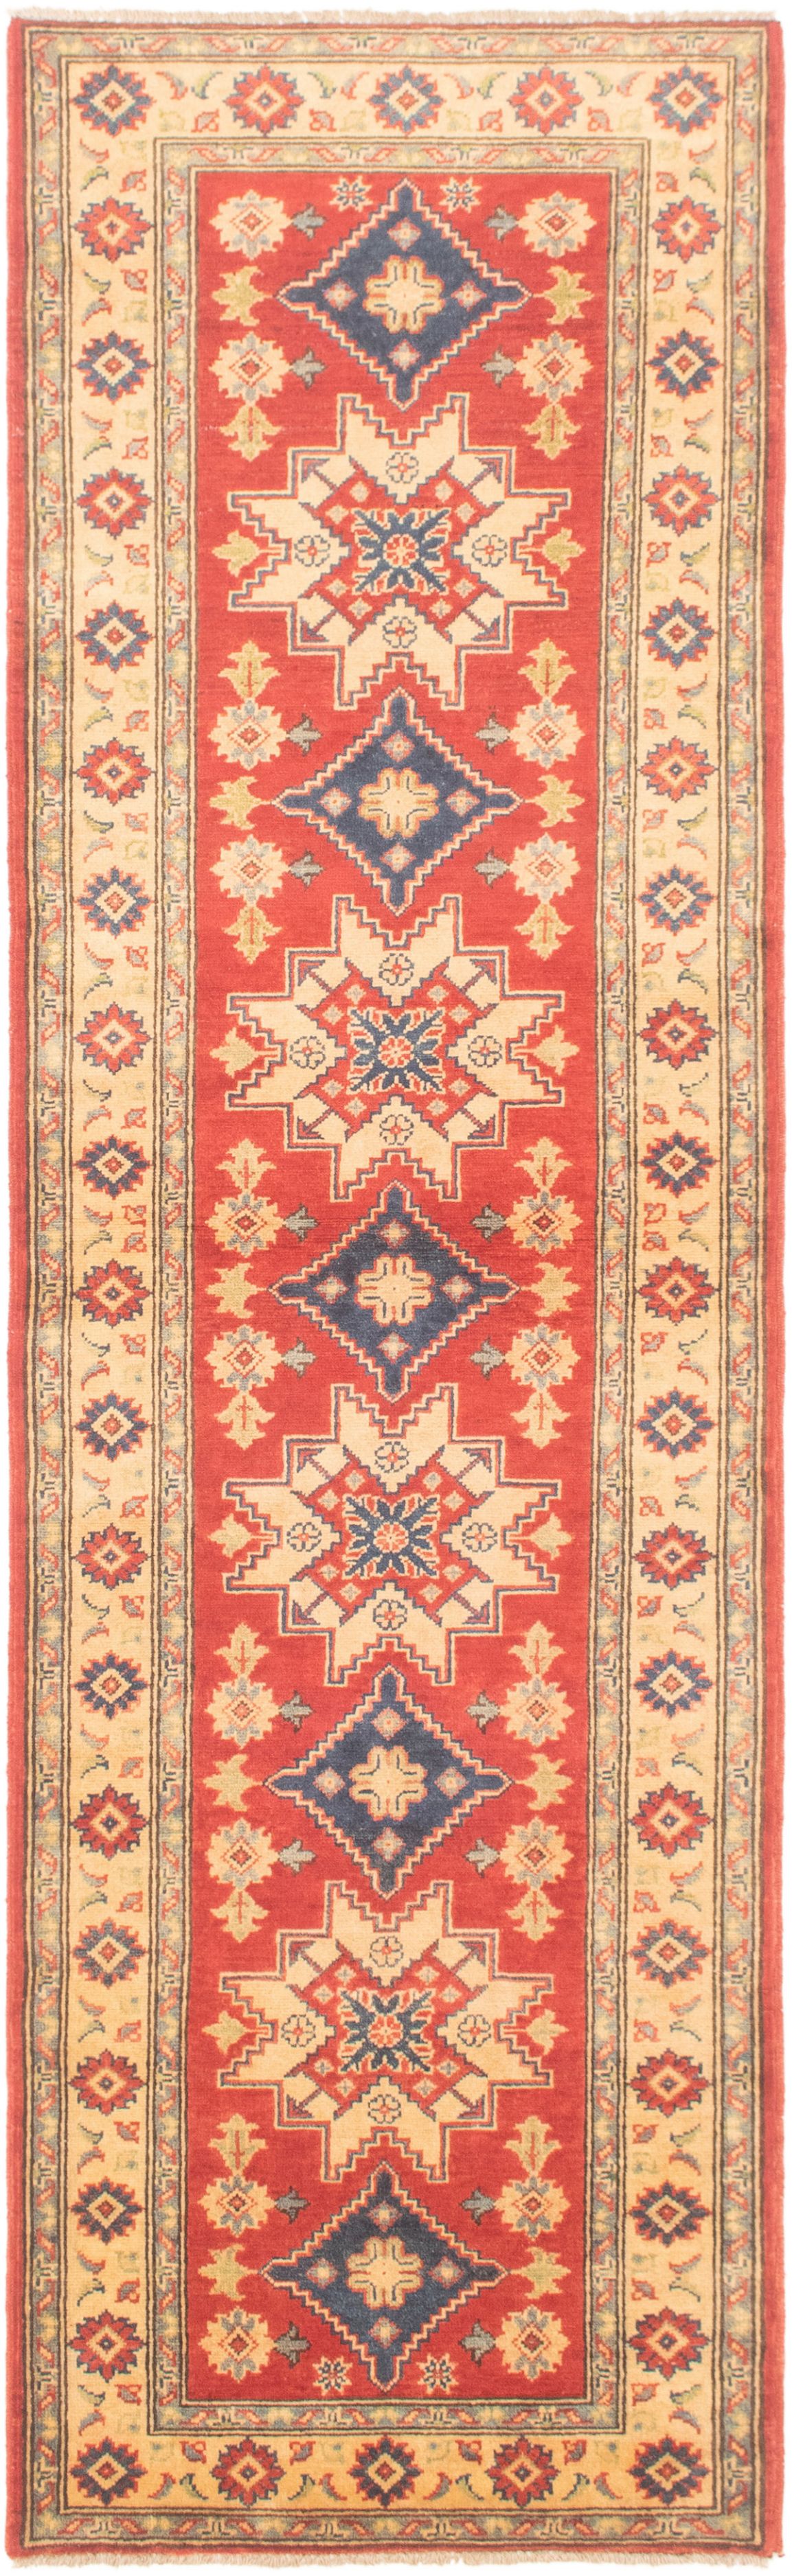 Hand-knotted Finest Gazni Red Wool Rug 2'9" x 9'7"  Size: 2'9" x 9'7"  